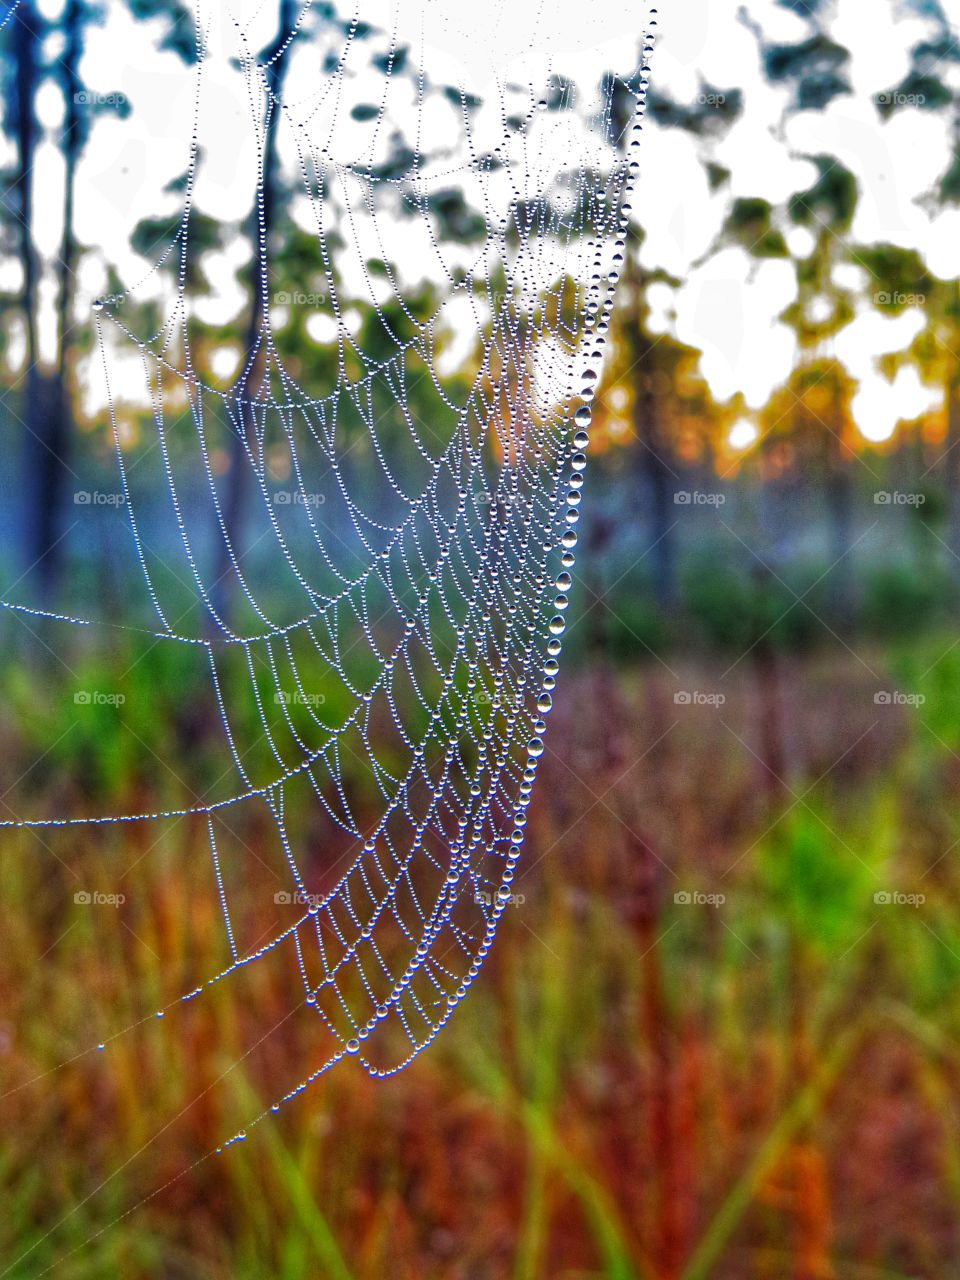 Spiderweb at sunrise with dew drops.